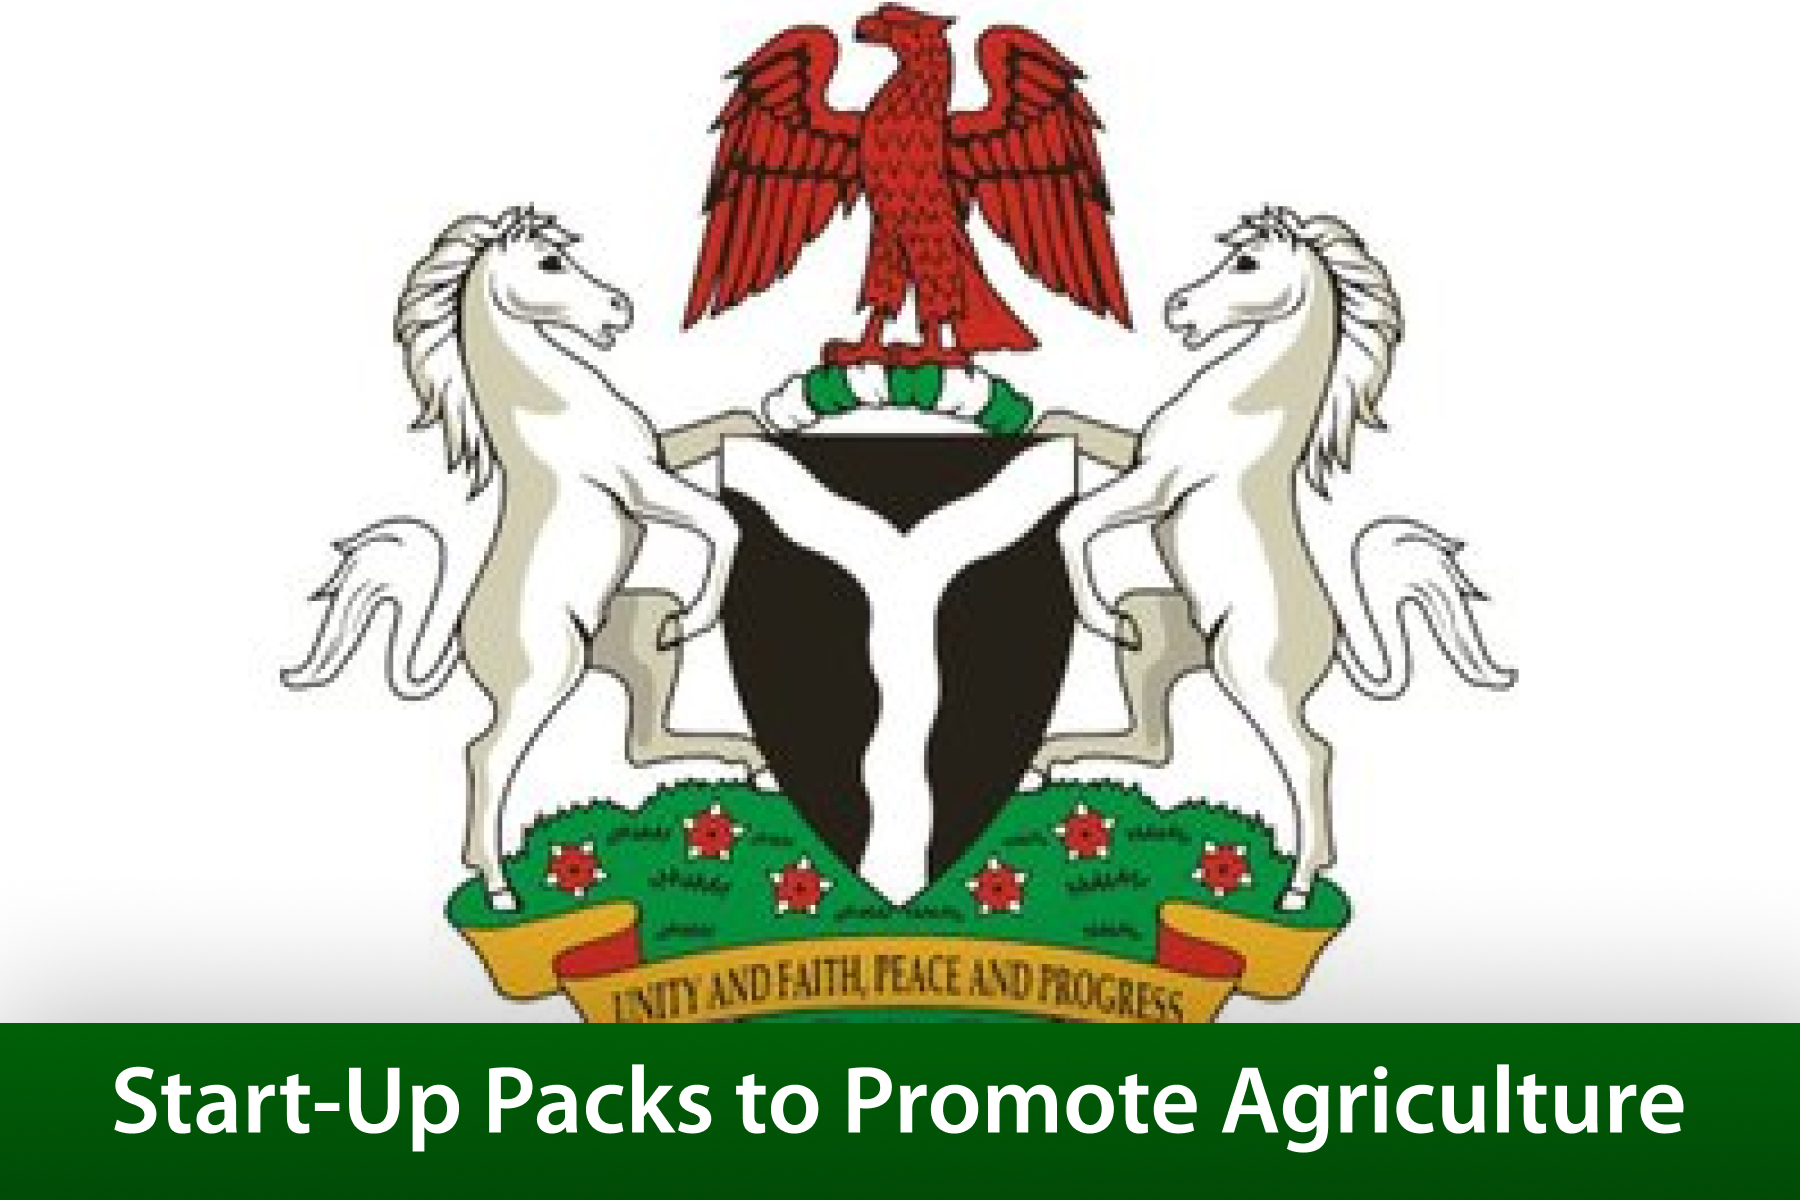 Start-Up Packs to Promote Agriculture